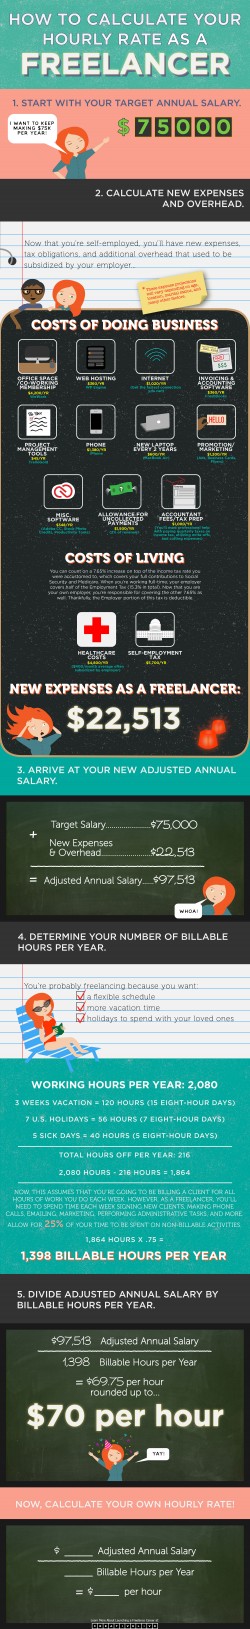 How to calculate your hourly rate as a freelancer